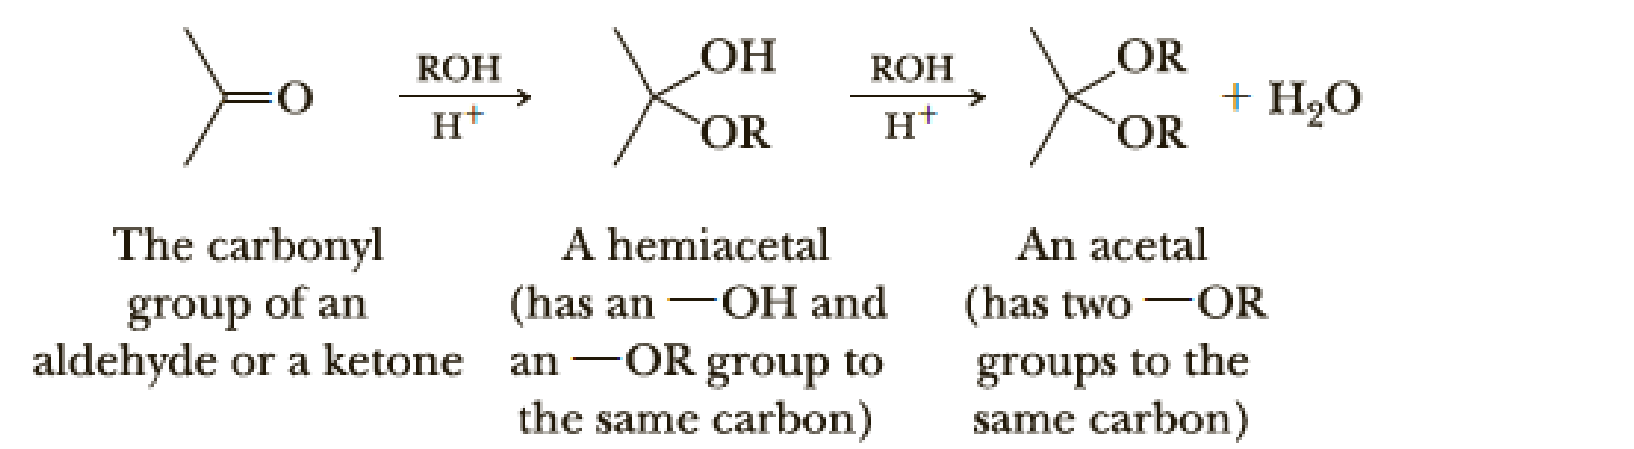 Chapter 11, Problem 11.41P, Aldehydes and ketones react with one molecule of an alcohol to form compounds called hemiacetals, in , example  1